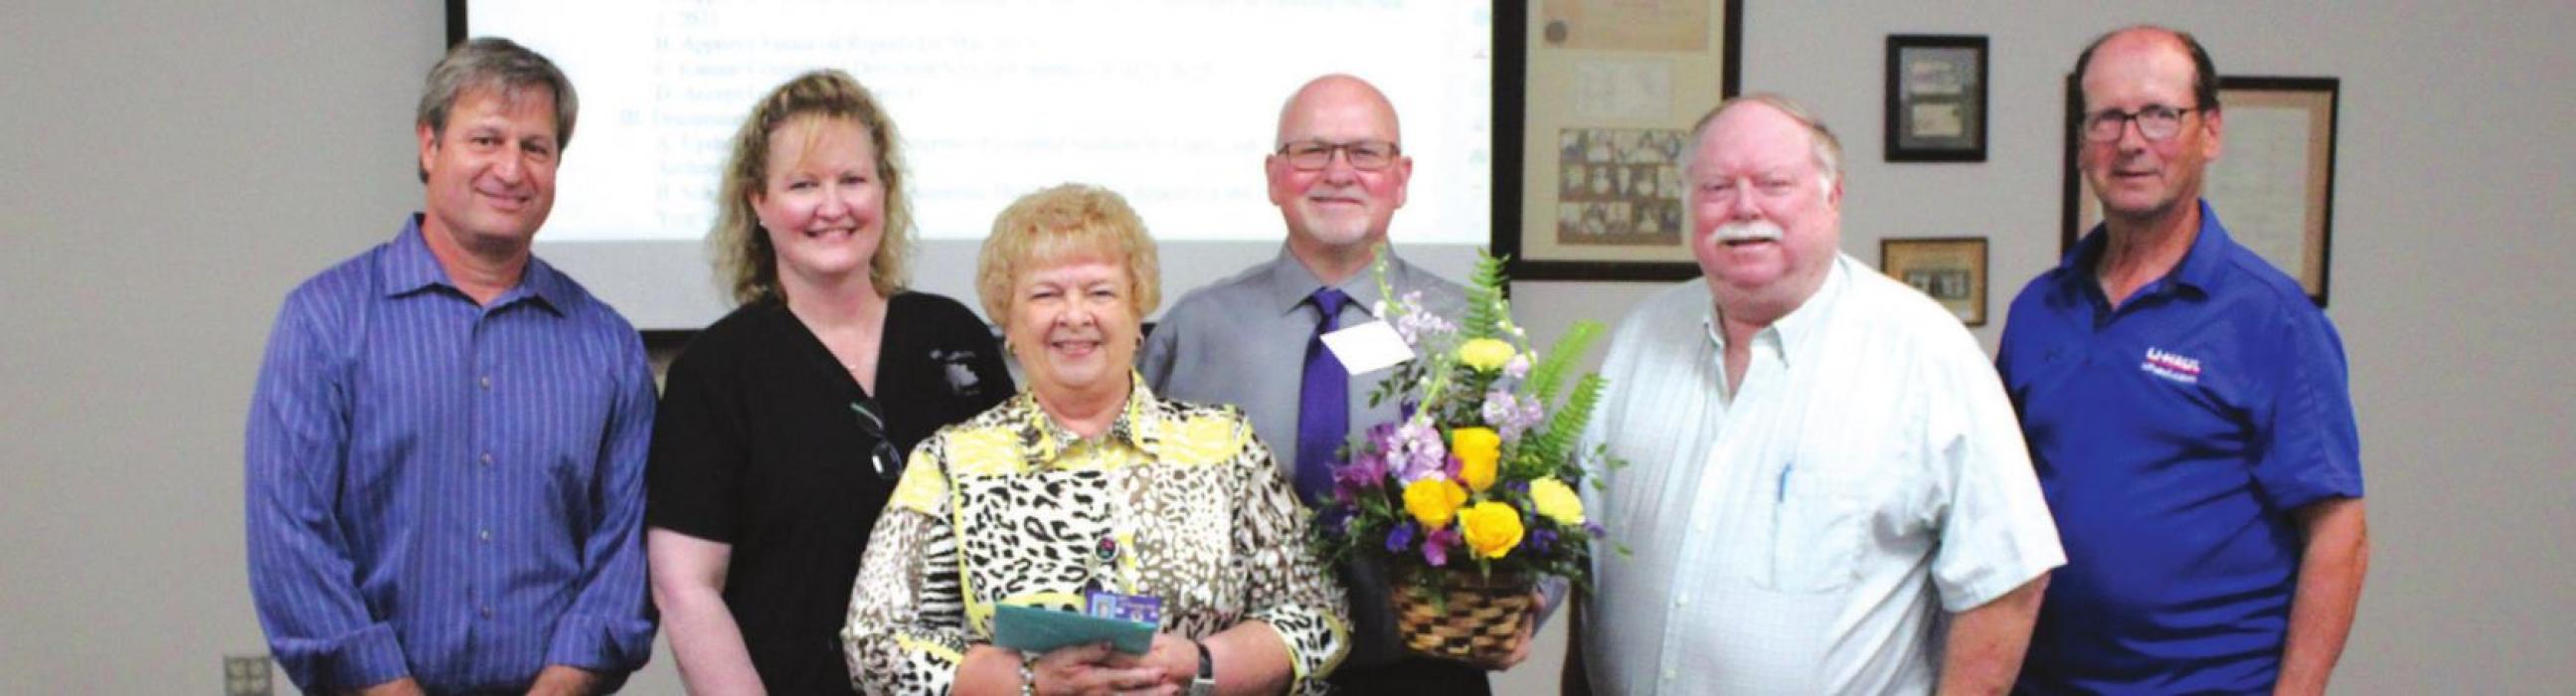 The La Grange school board members present retiring secretary Nora Otto with gifts at Monday’s meeting, her last. Left to right: Marc Fitzpatrick, Karen Roberts, Nora Otto, Gary Drab, Greg Trlicek and Calvin Mersiovsky.